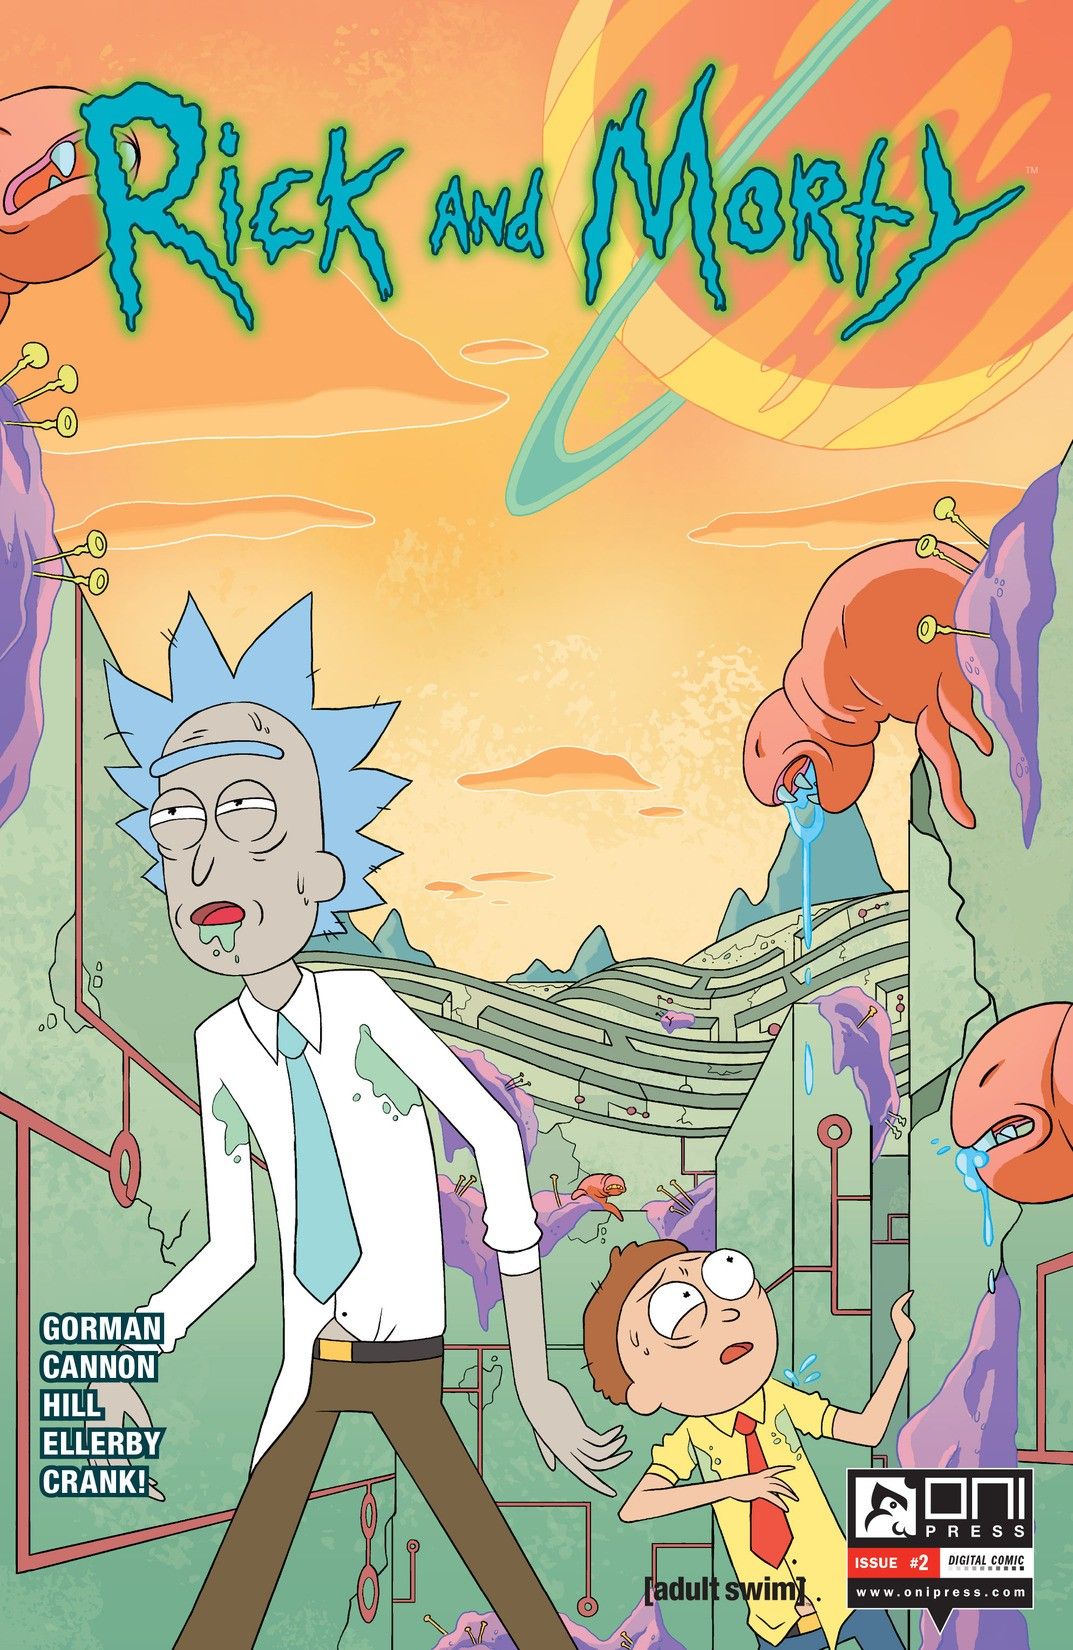 Rick And Morty Issue 2 Rick And Morty Wiki Fandom Powered By Wikia